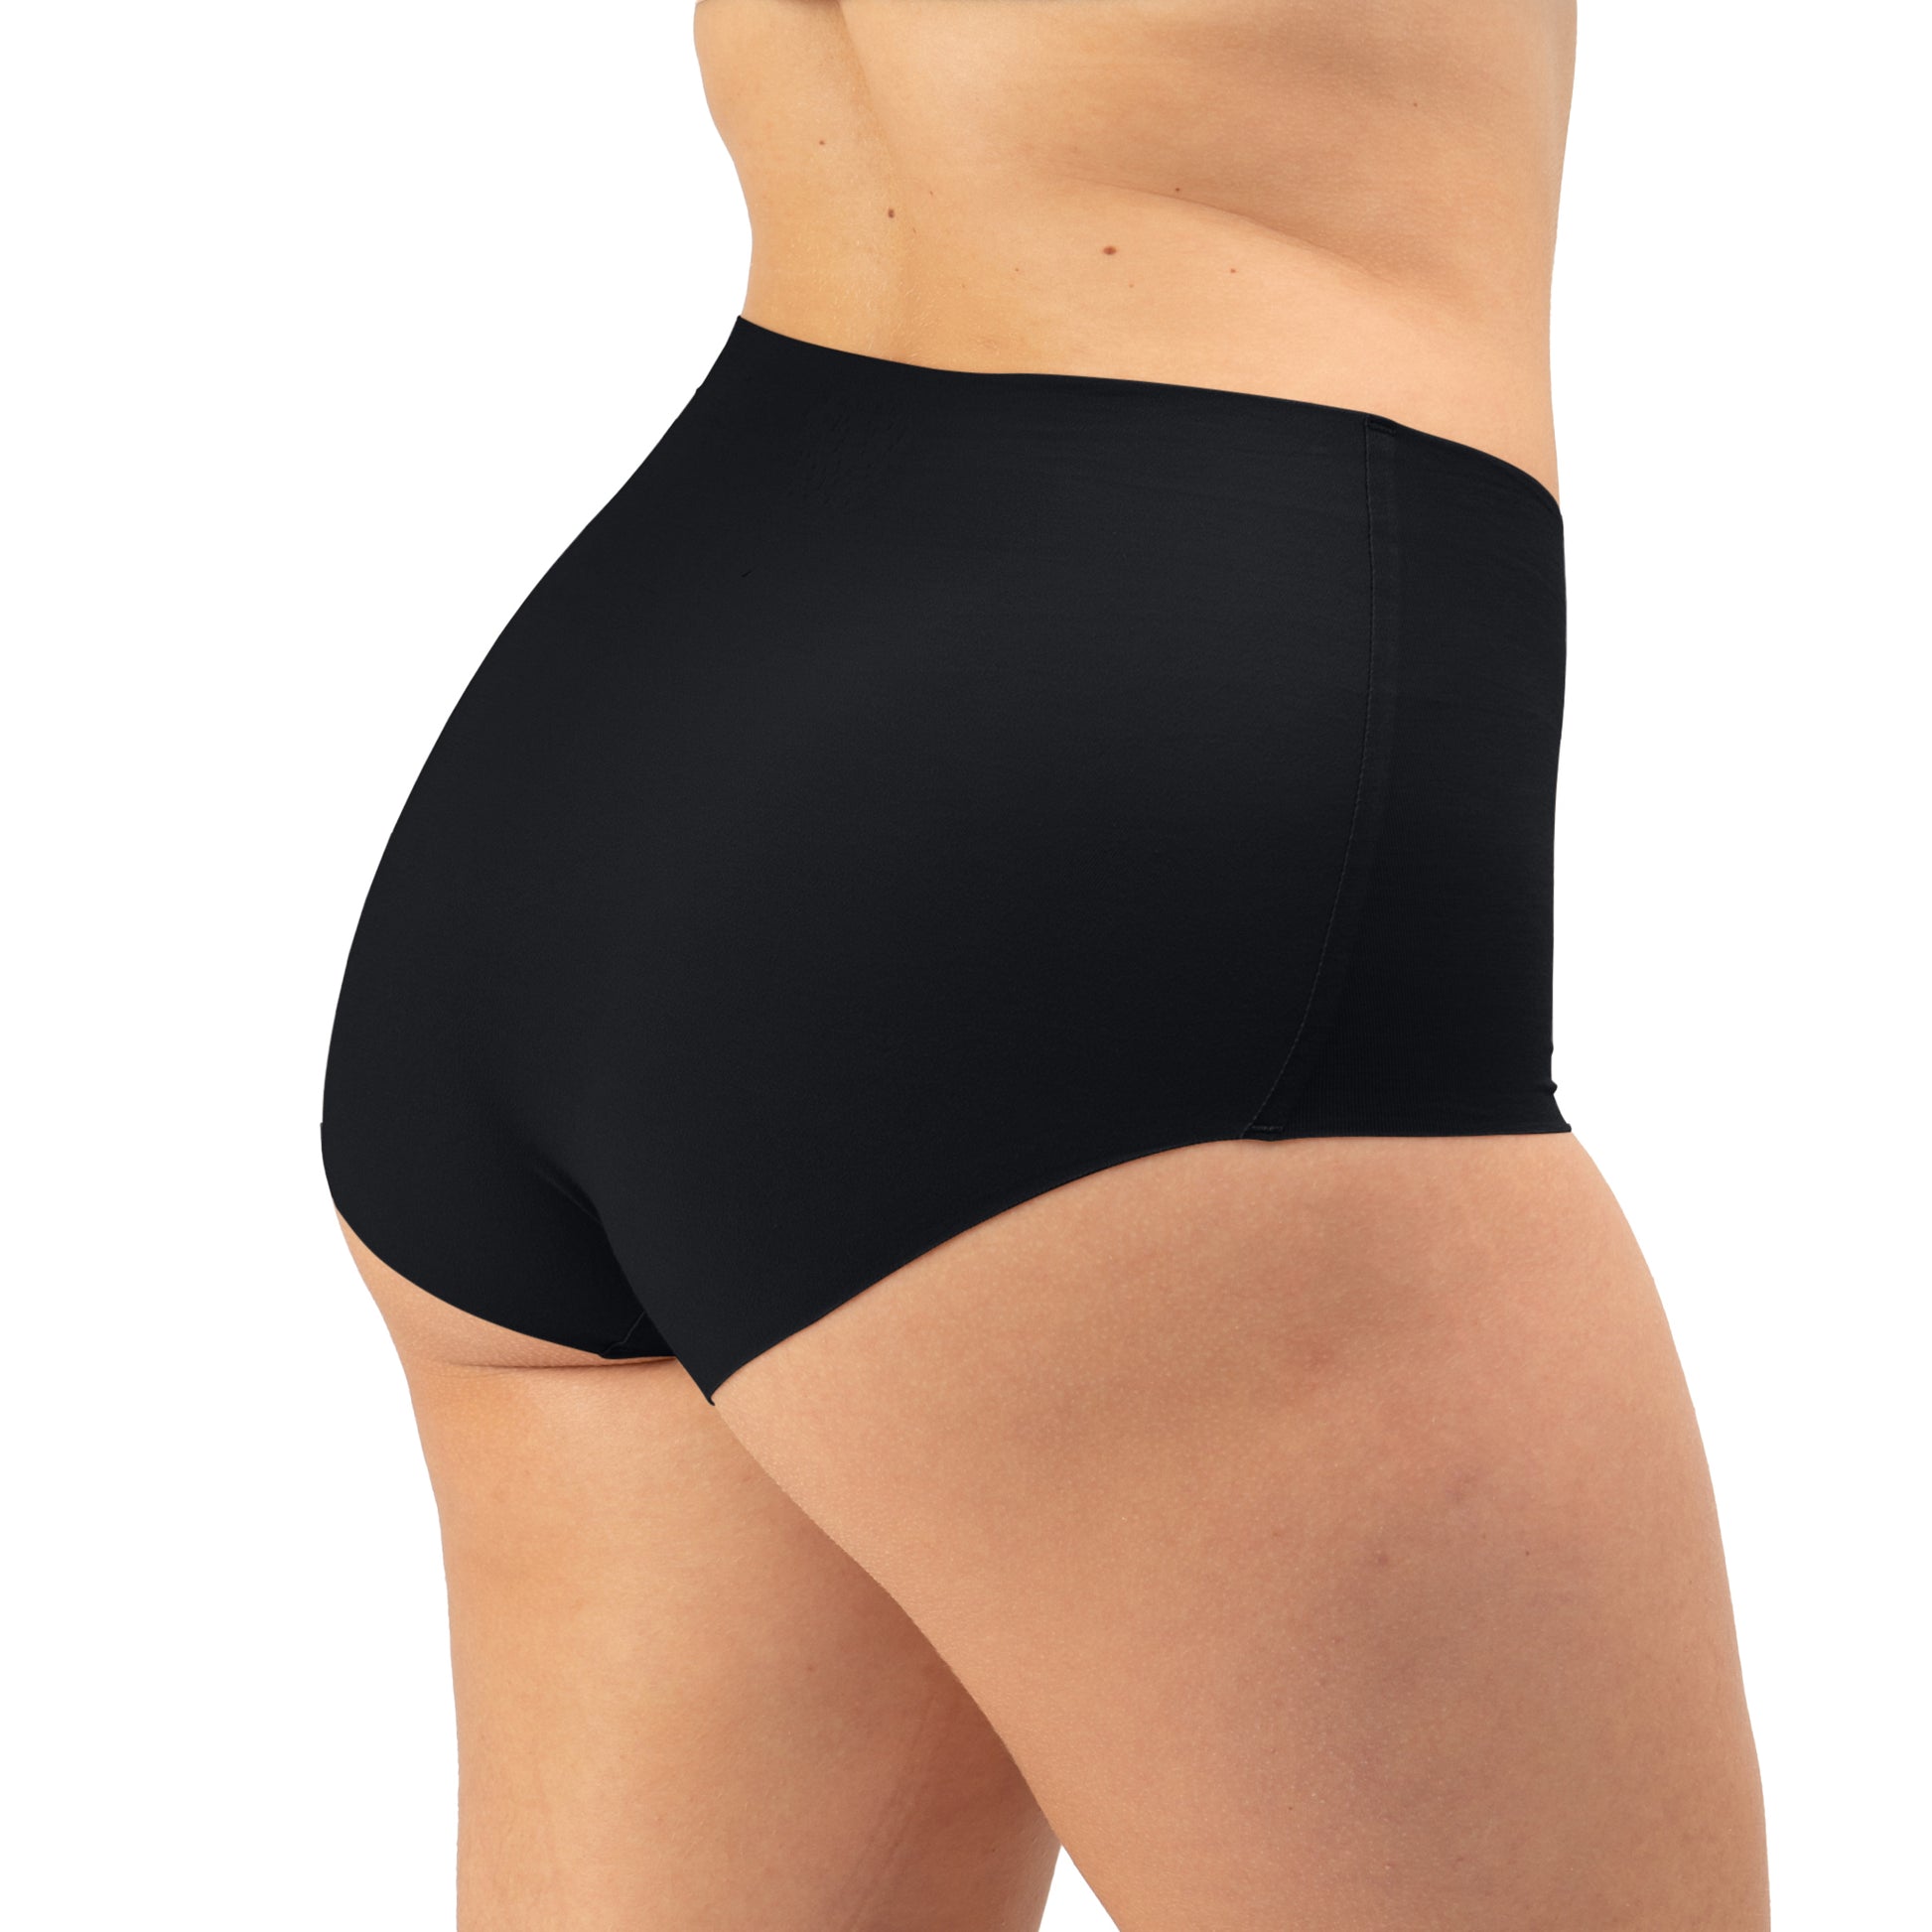 Women's High Waisted Bikini cotton underwear in the color black - back view